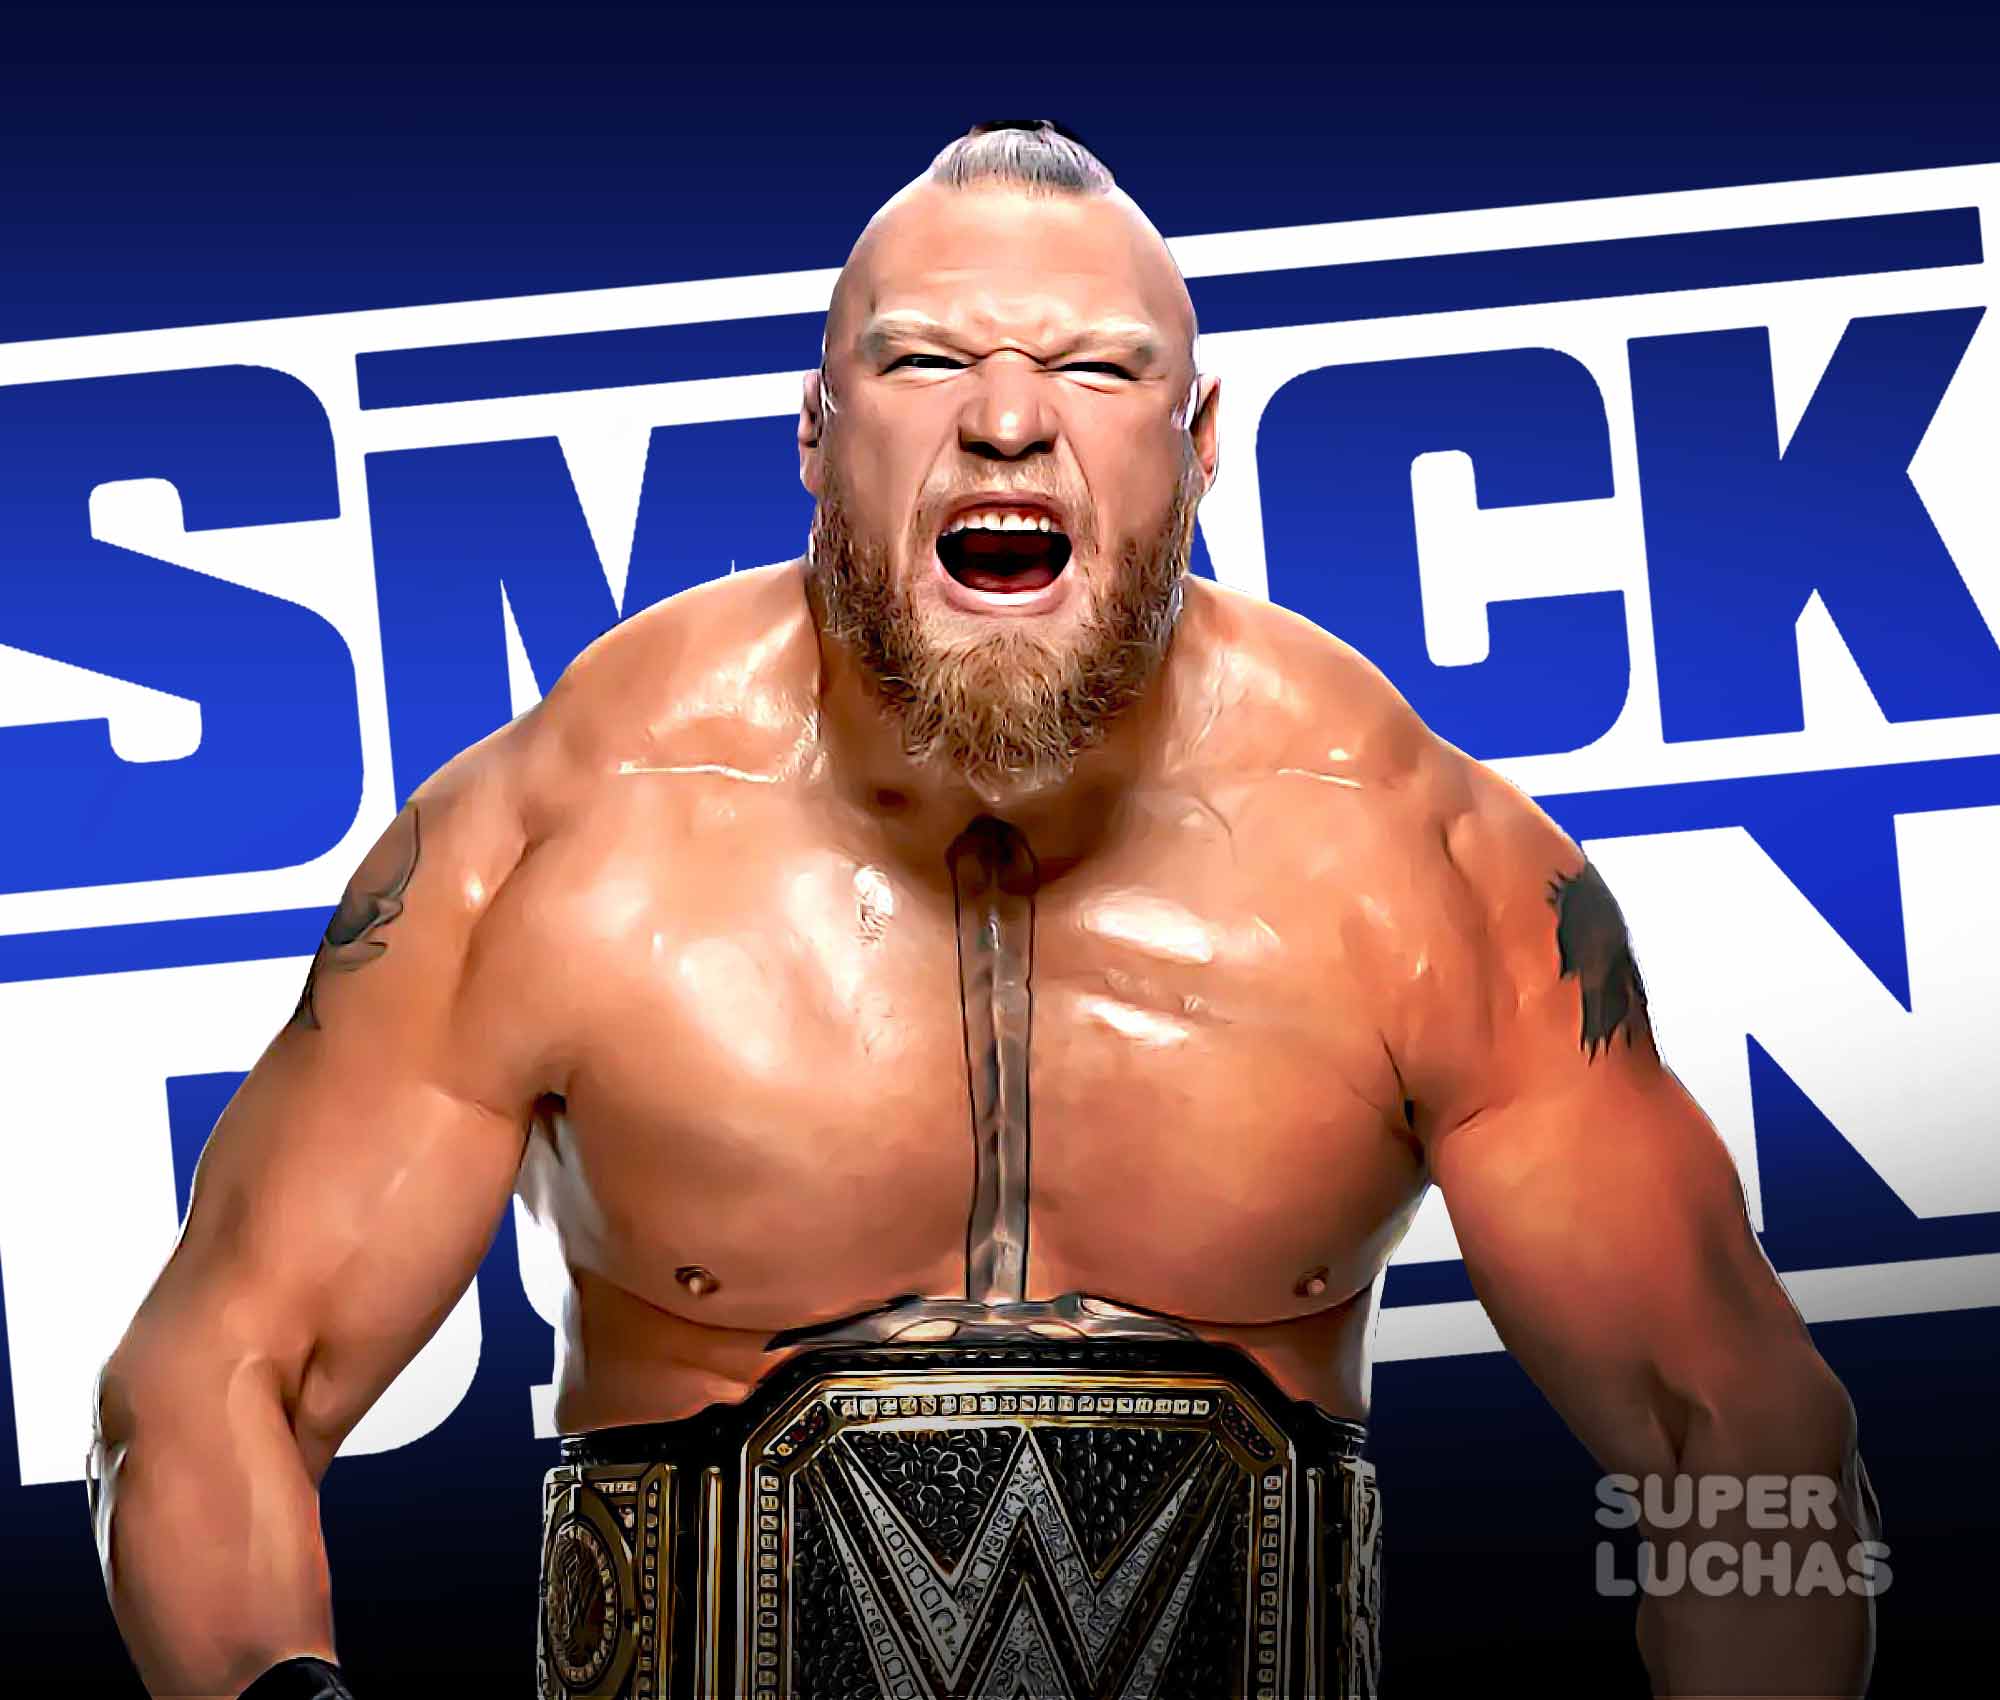 WWE SMACKDOWN March 25 2022 Live results Lesnar